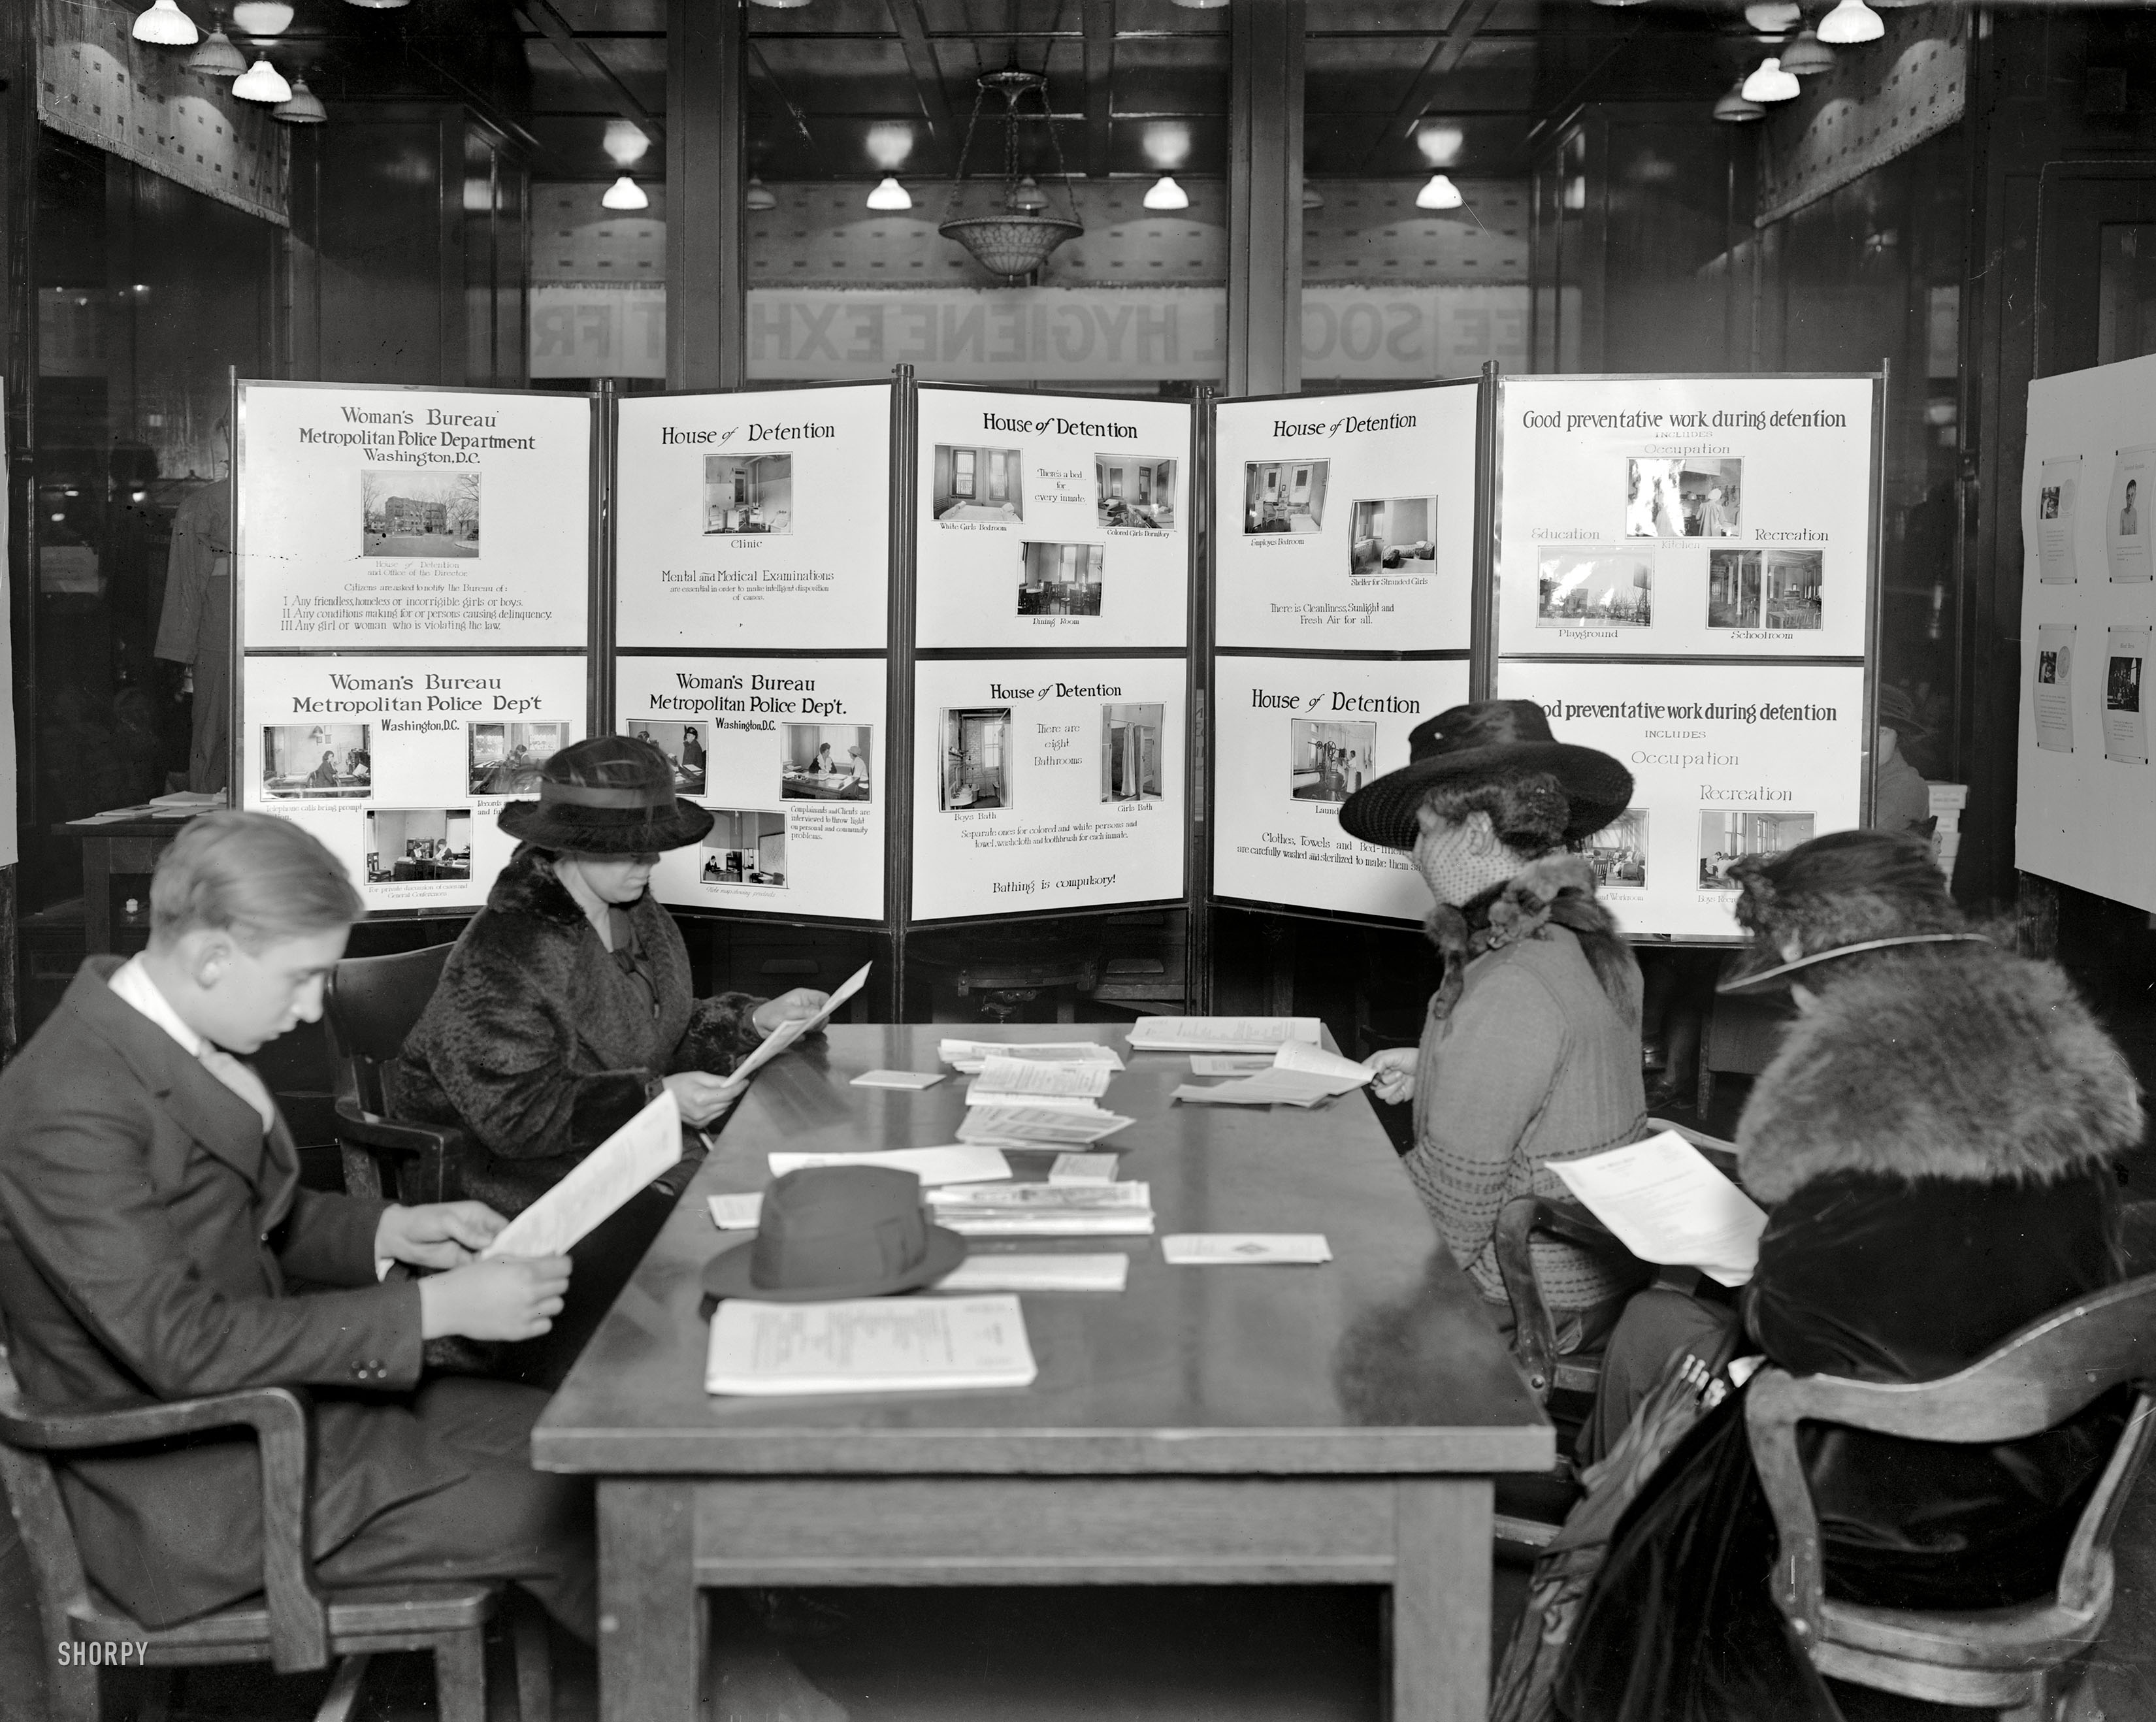 1922. Washington, D.C. "Women's Bureau." The House of Detention display at the Social Hygiene exhibit. National Photo glass negative. View full size.